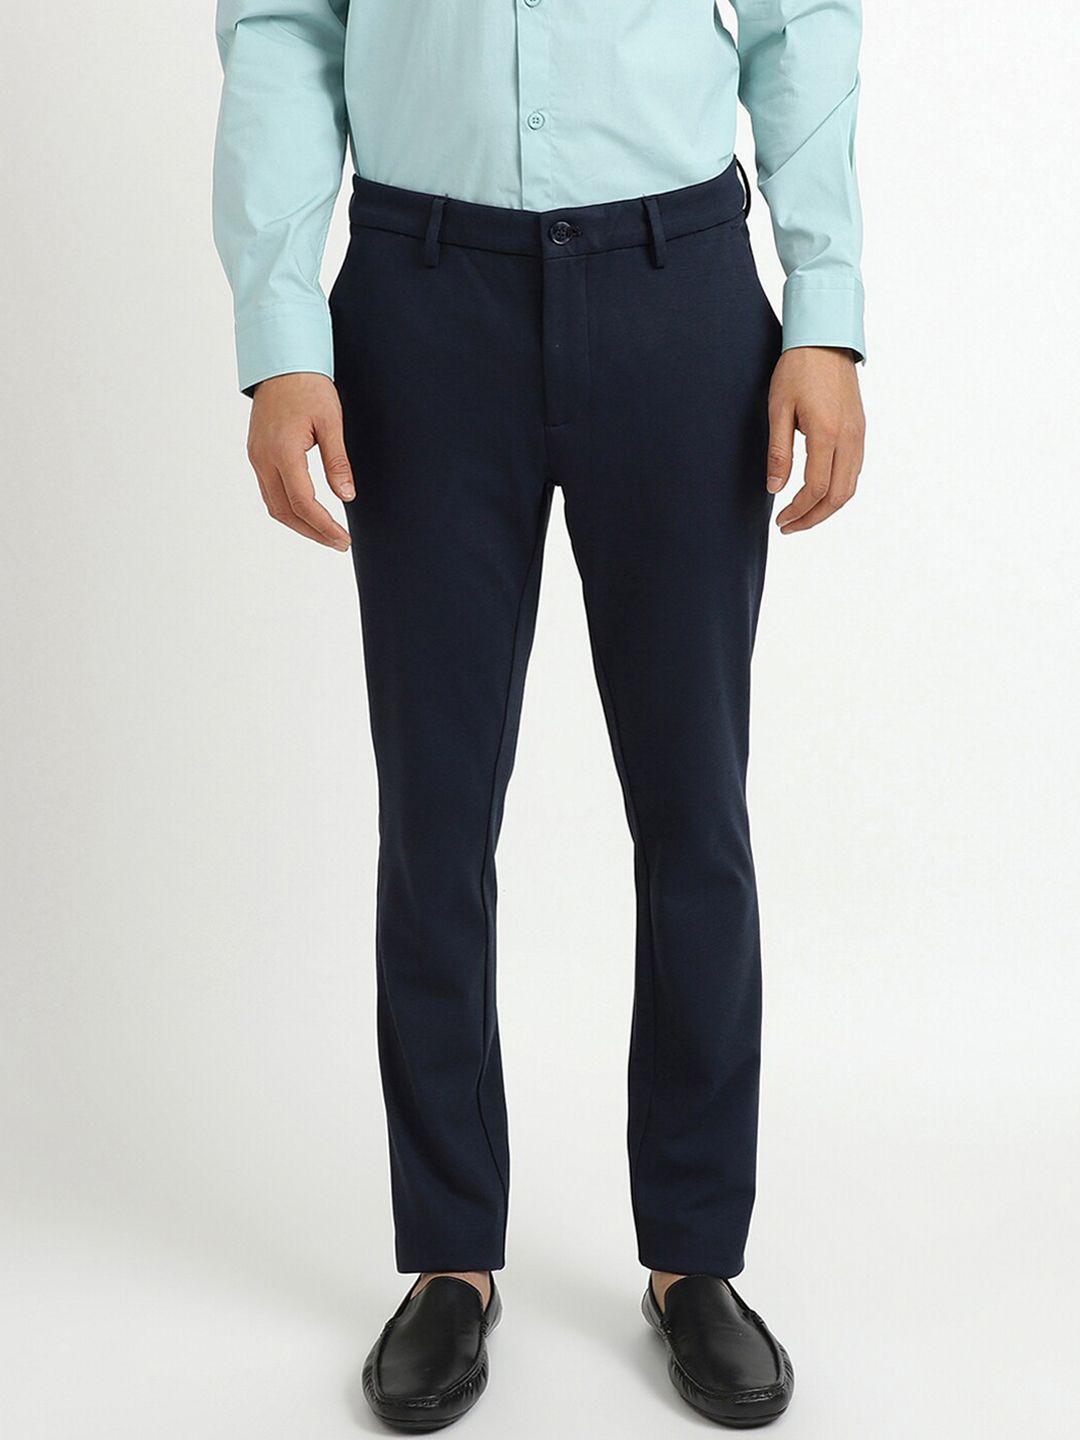 united colors of benetton men navy blue cotton solid slim fit trousers